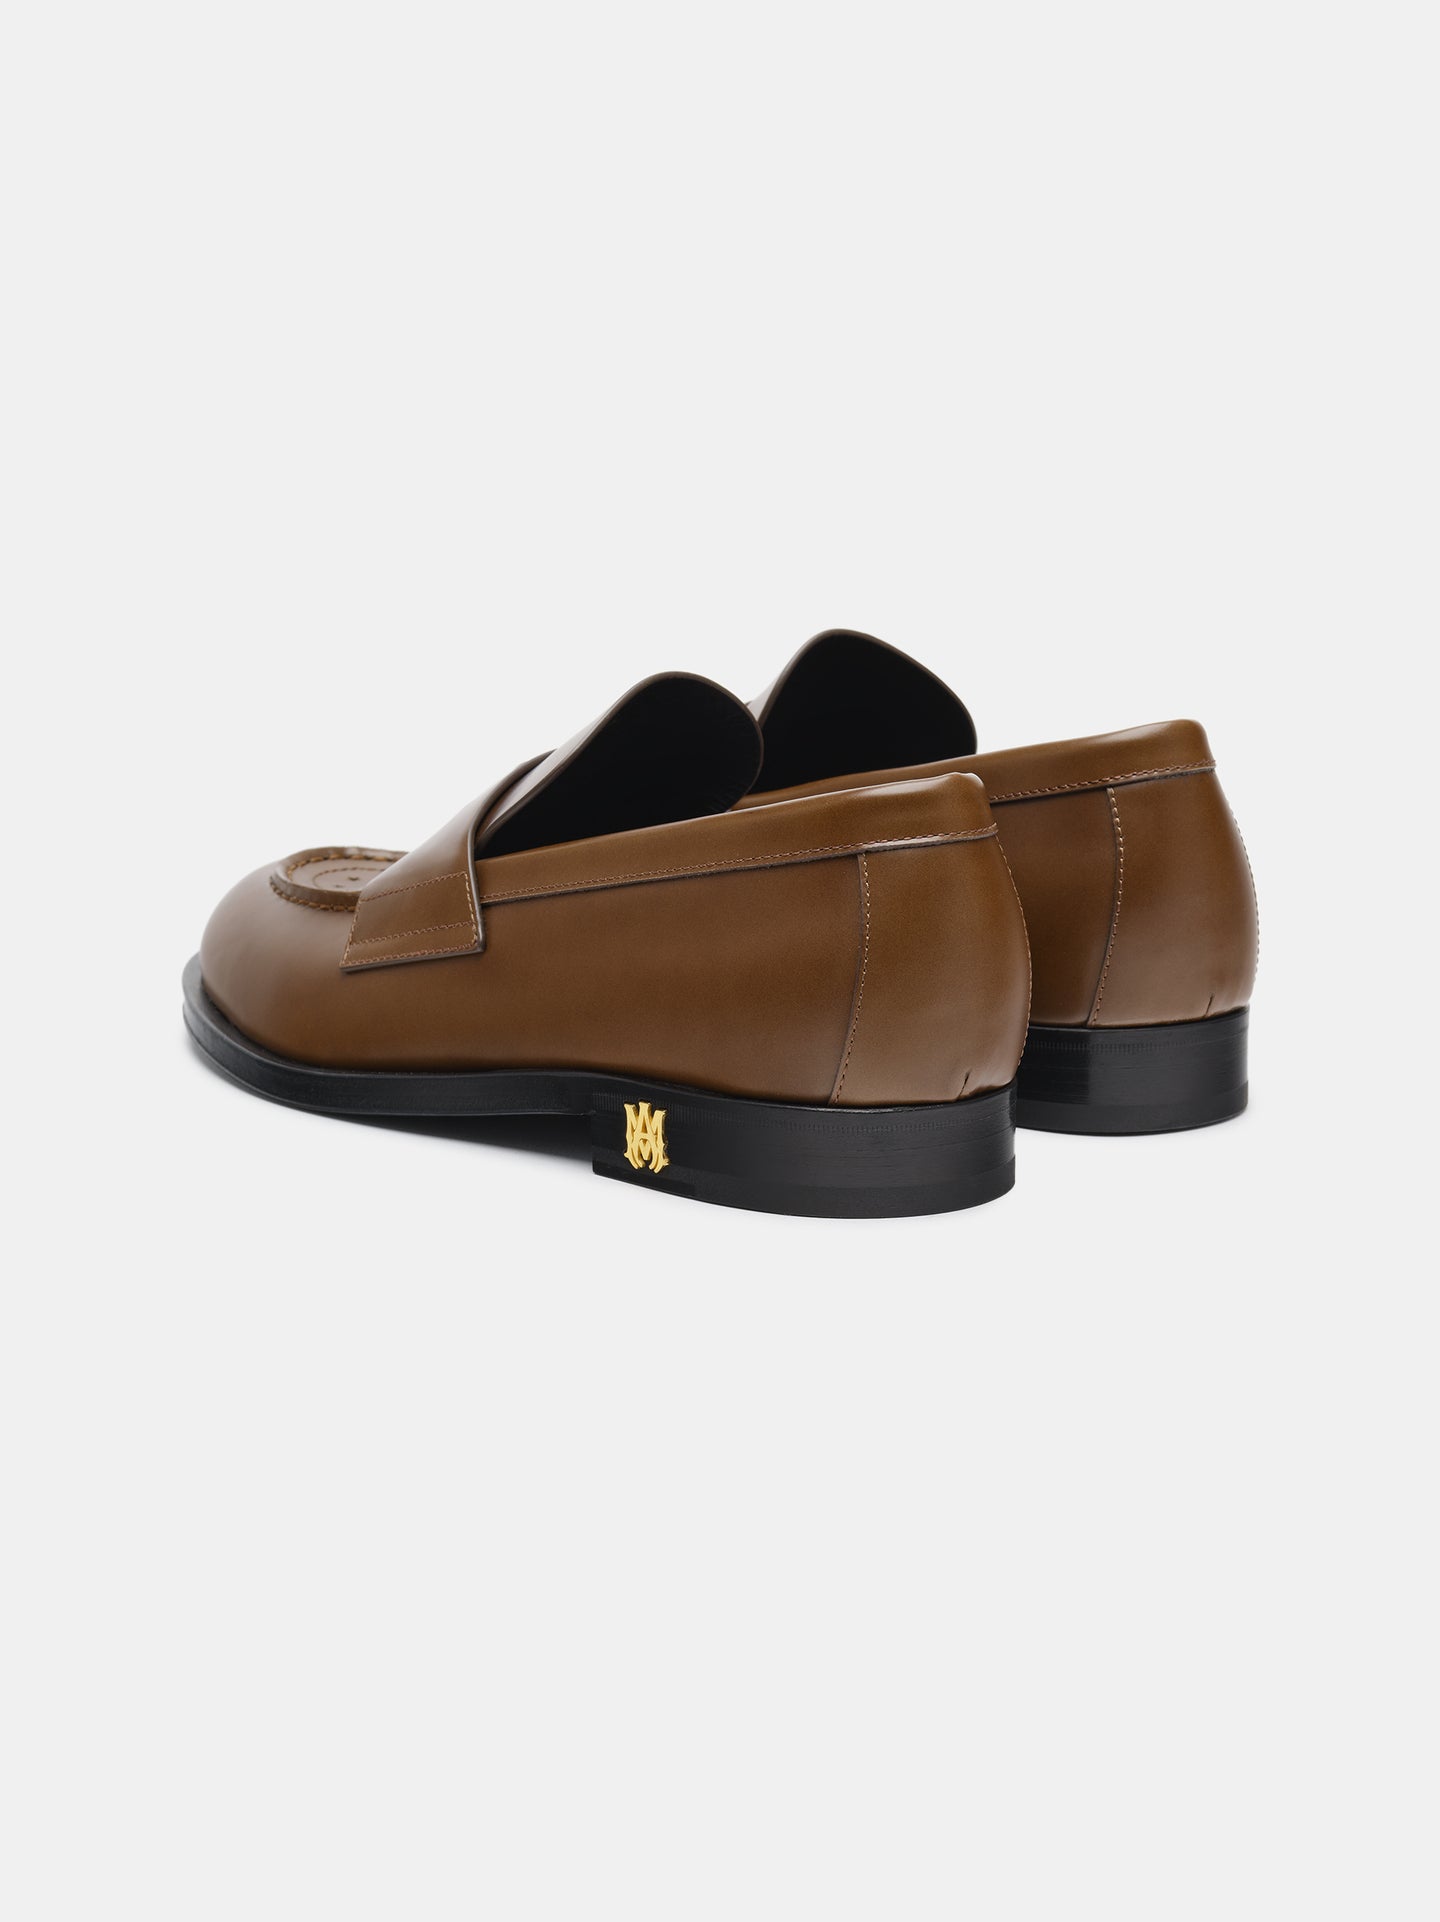 MA LOAFER - Brown